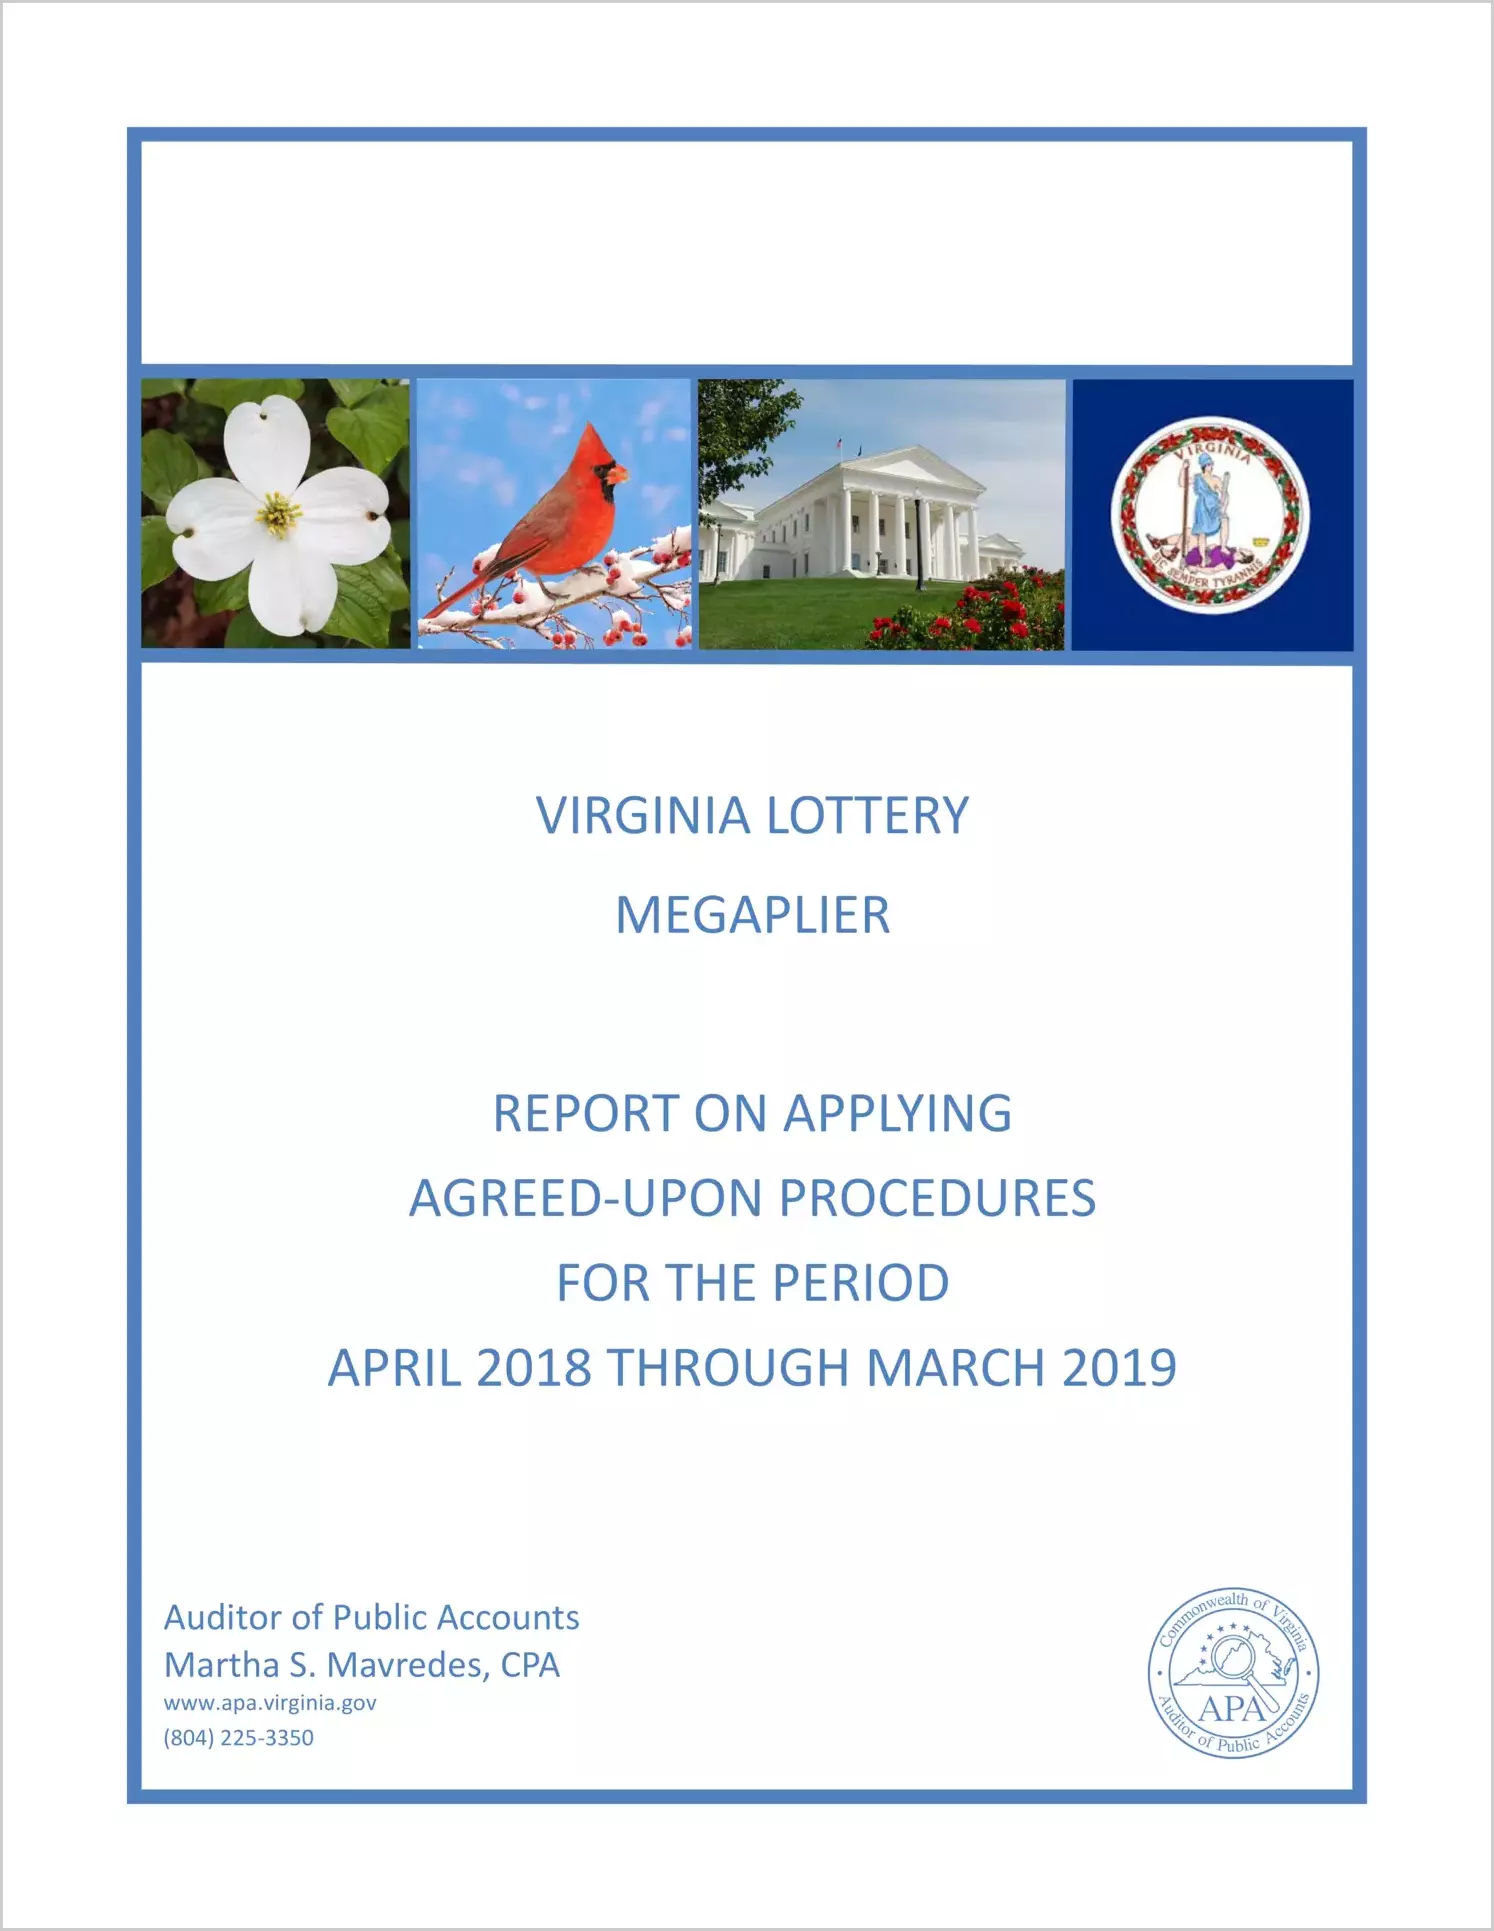 Virginia Lottery Megaplier Report on Applying Agreed-Upon Procedures for the period April 2018 through March 2019